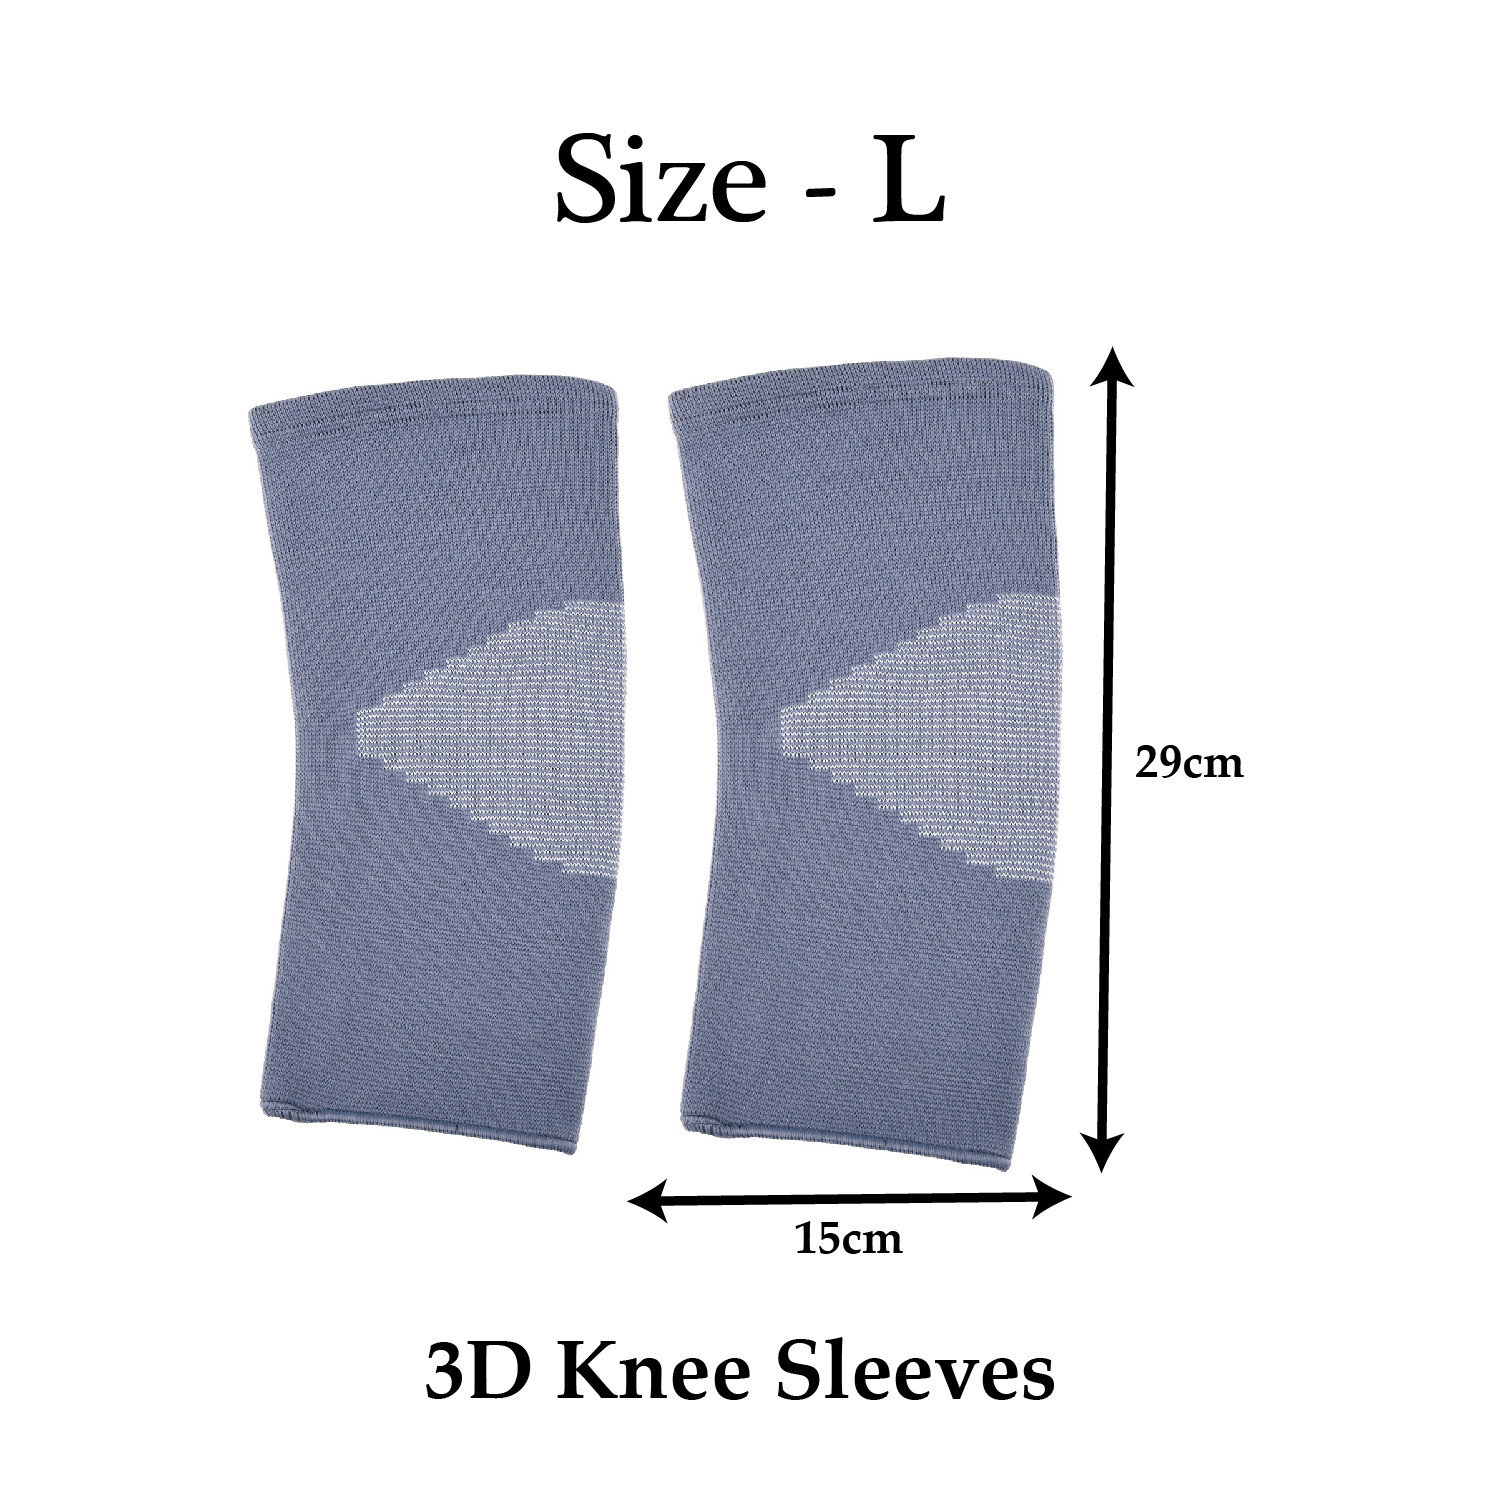 Kuber Industries 3D Knee Cap | Cotton Knee Sleeves |Sleeves For Joint Pain | Sleeves For Arthritis Relief | Unisex Knee Wraps | Knee Bands | Size-L | 1 Pair | Gray & White